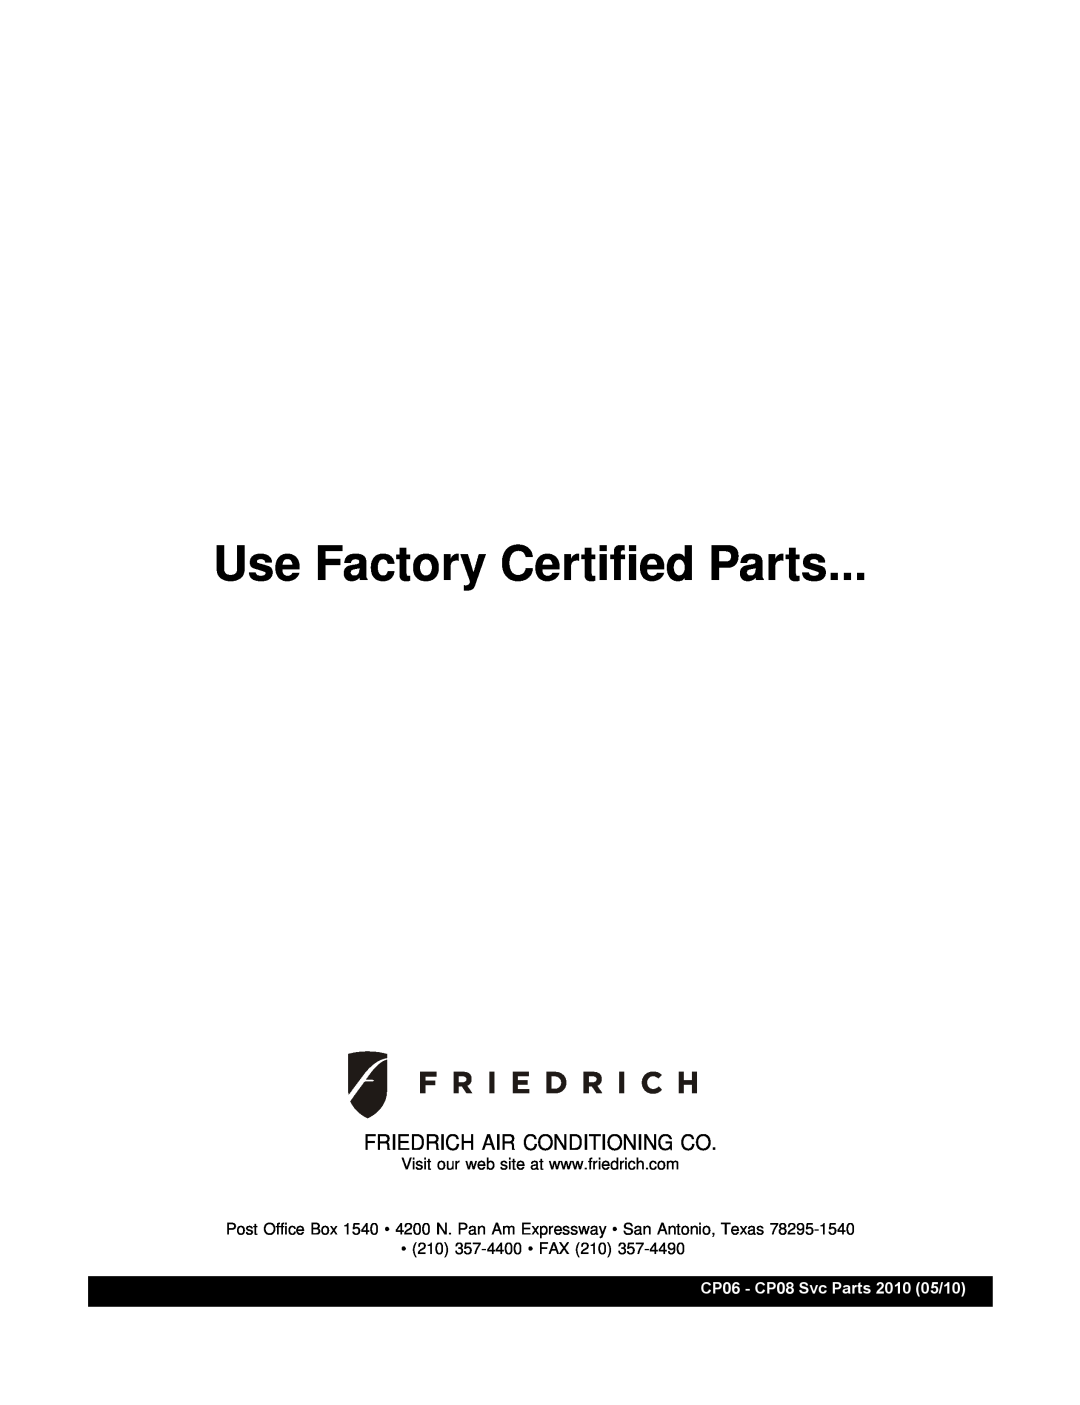 Friedrich CP08F10, CP06F10 Use Factory Certified Parts, Friedrich Air Conditioning Co, CP06 - CP08 Svc Parts 2010 05/10 